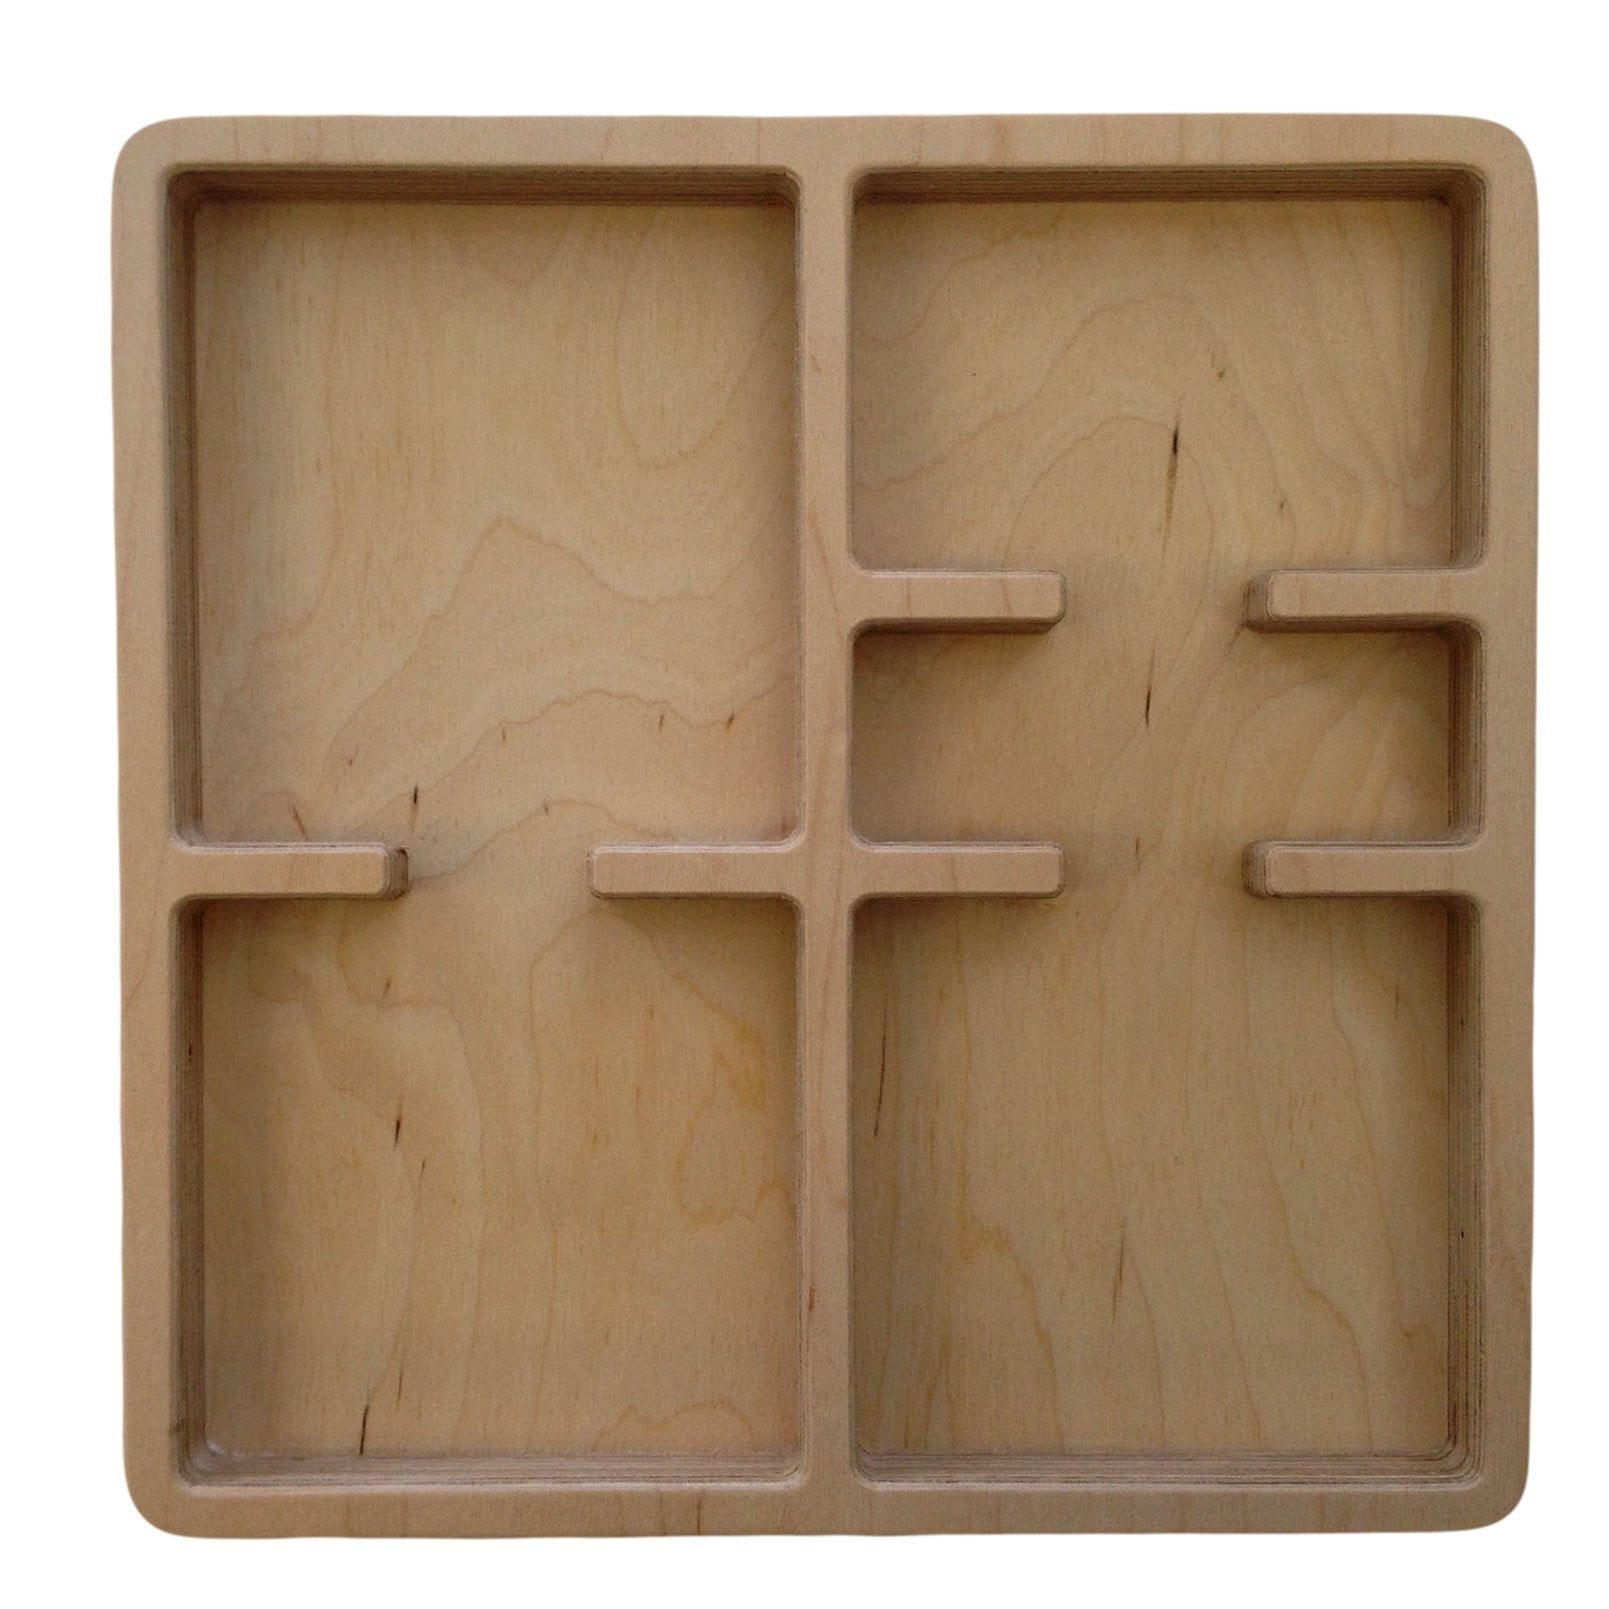 Storage And Display - Small Size 5 Part Tray